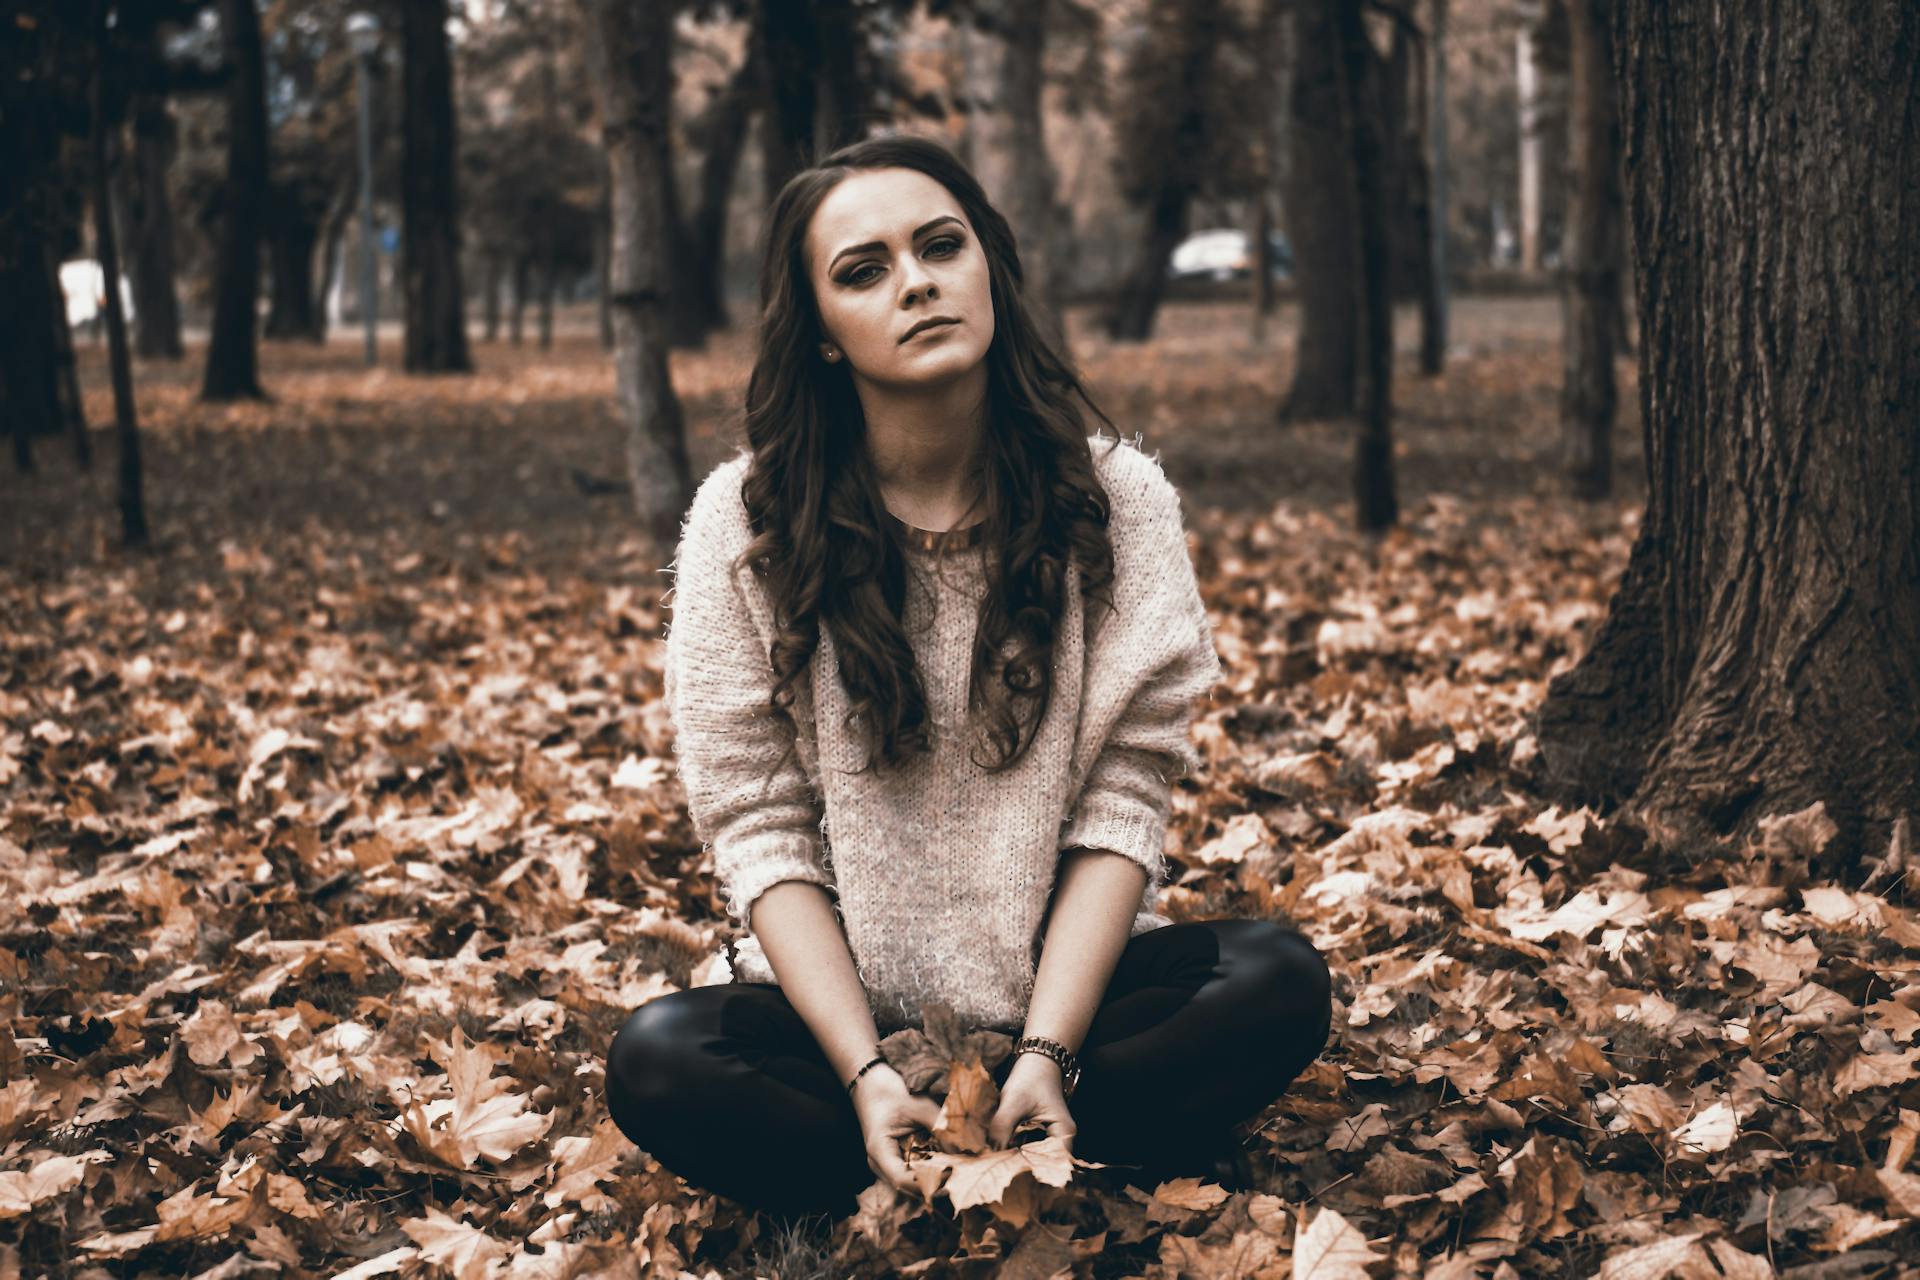 A young woman sitting in a forest holding fallen leaves | Source: Pexels